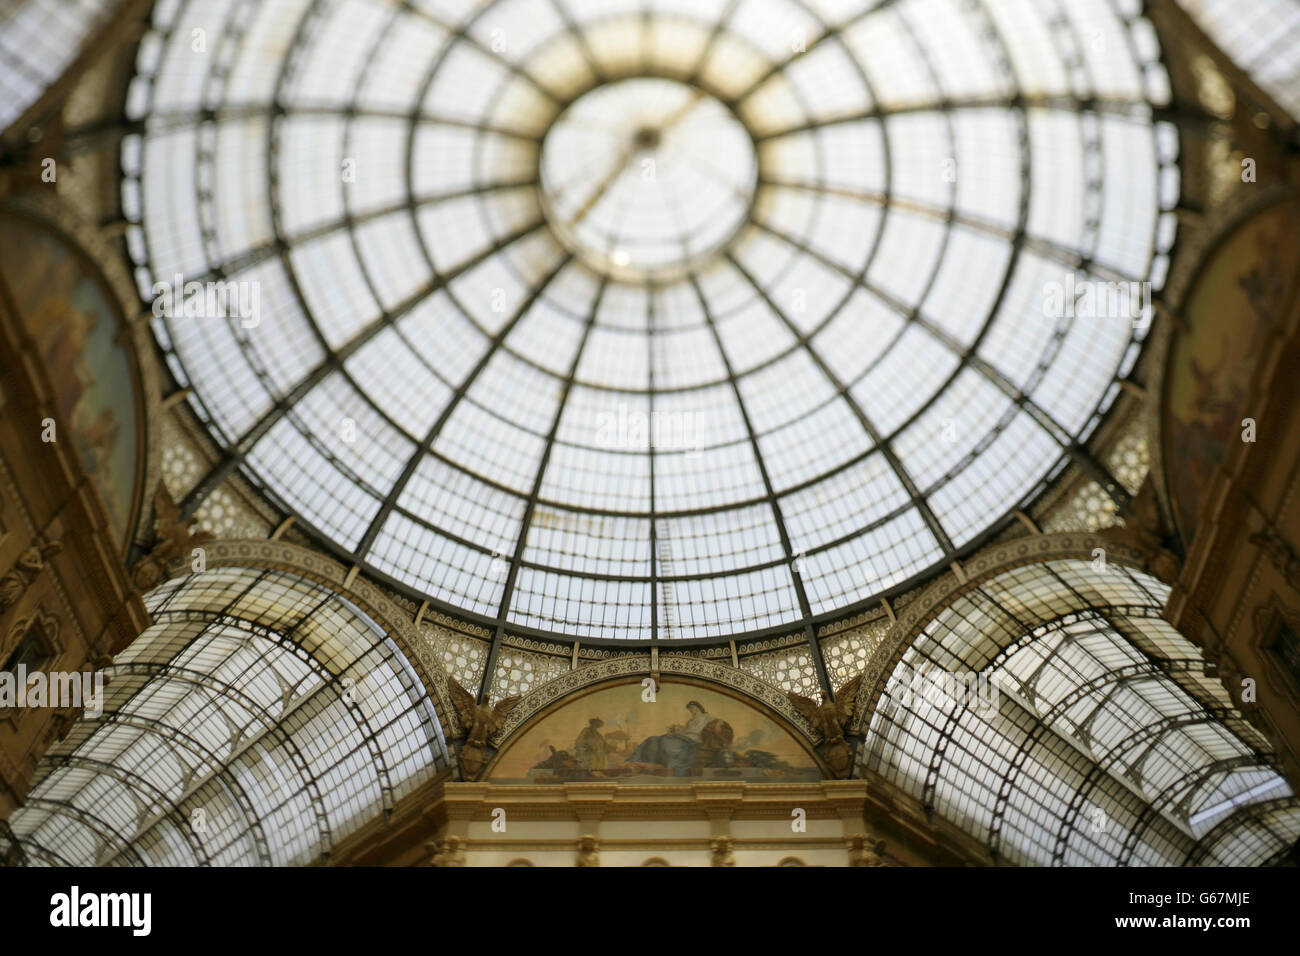 Glass and wrought iron canopy of the Galleria Vittoria Emanuele II, Milan, Italy. Stock Photo